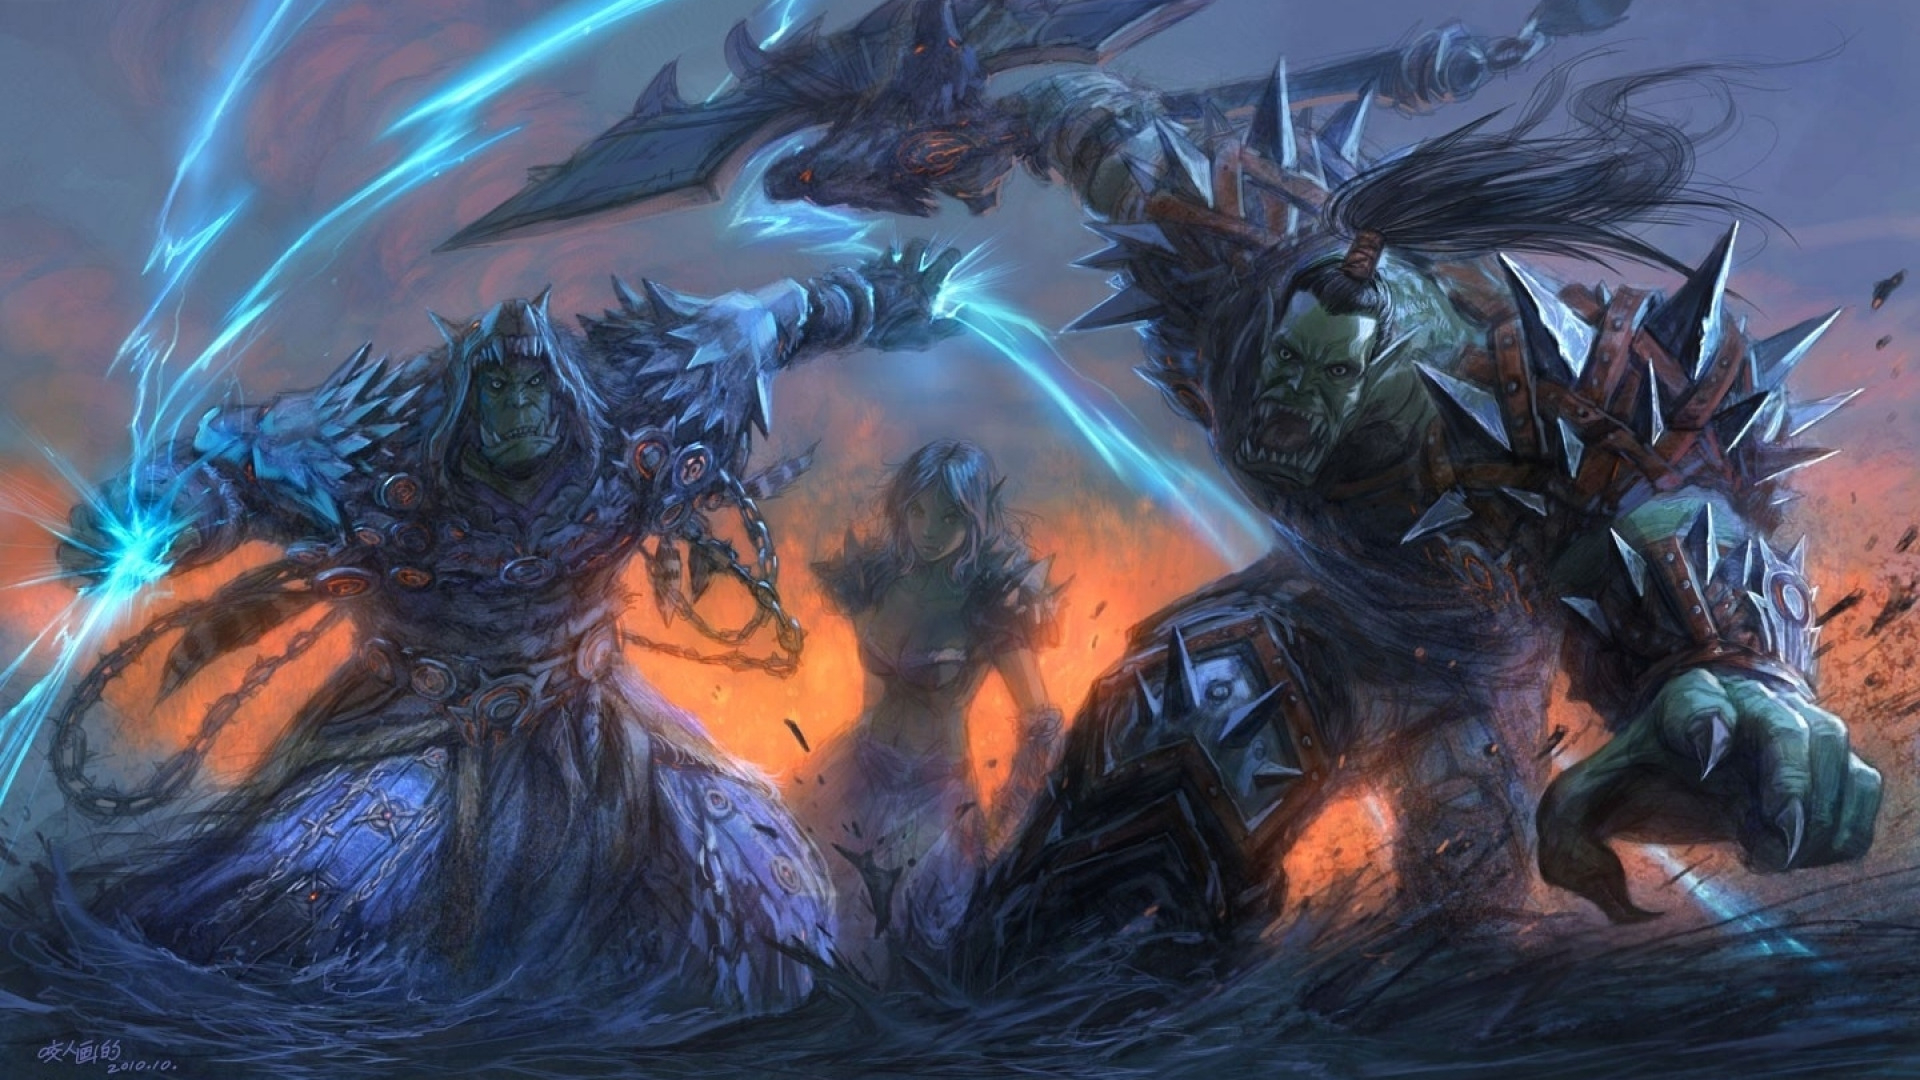 1920x1080 Download wallpaper warrior, orcs, wow, Horde, world of warcraft, shaman, Warcraft, horde, orc, section games in resoluti